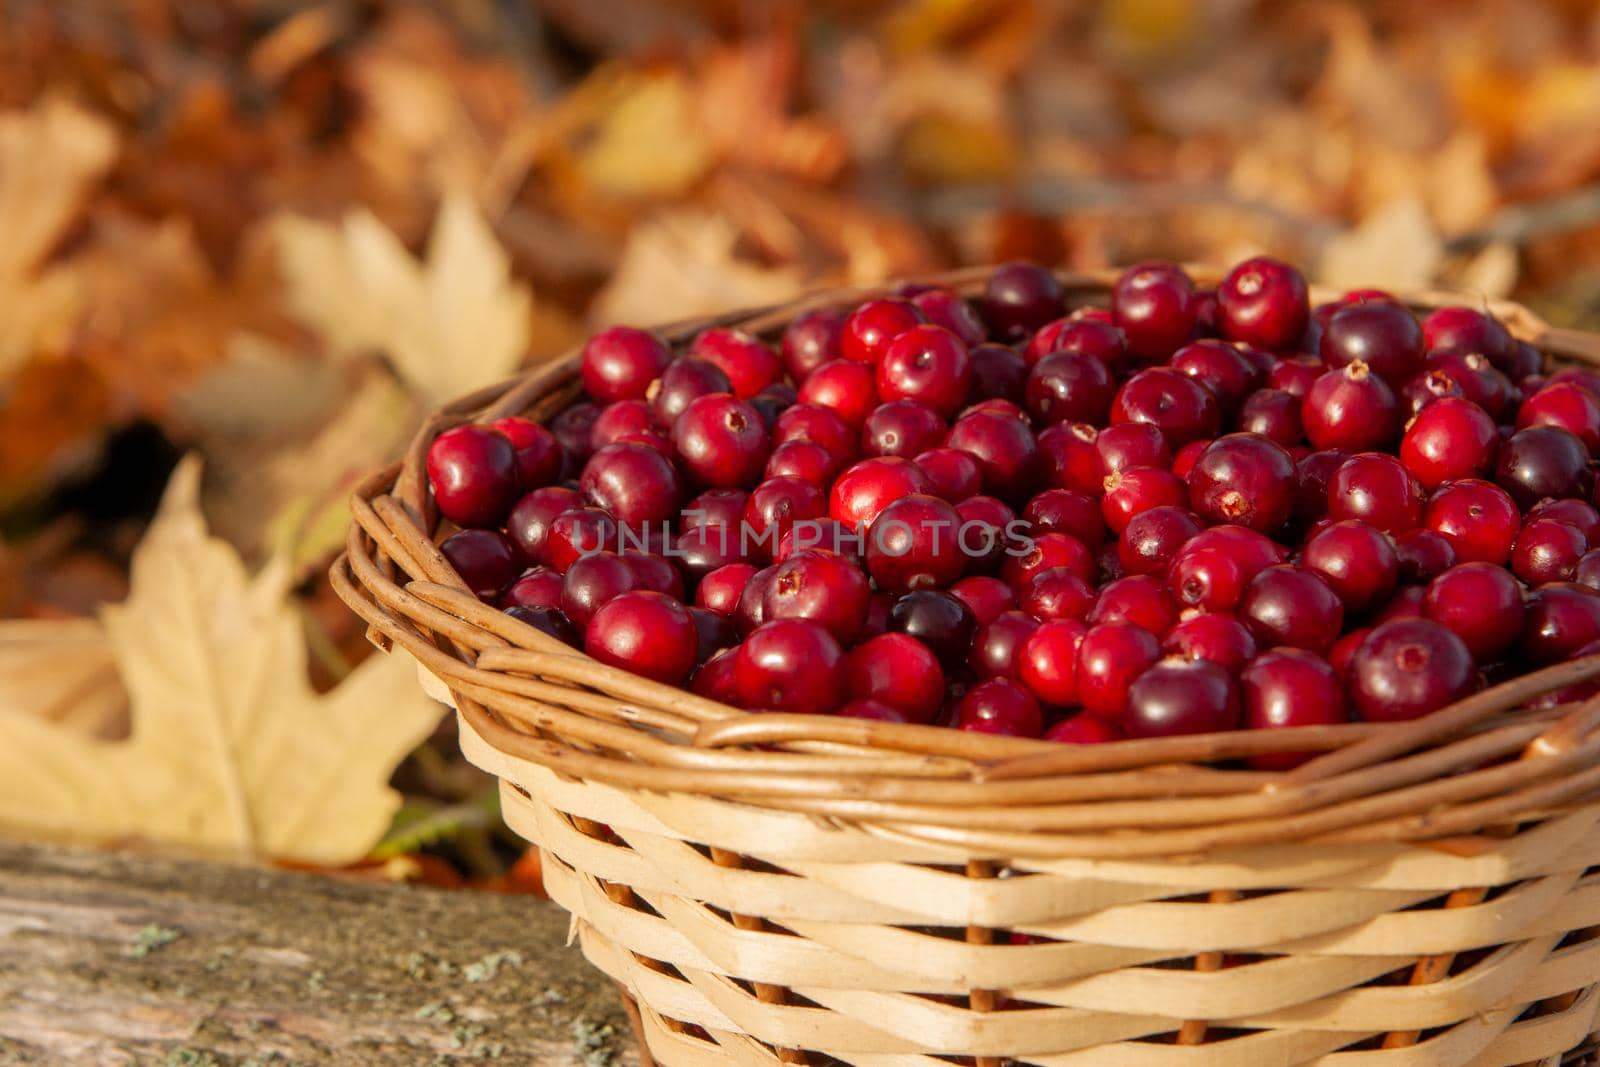 Full basket with juicy red cranberries in a basket on an autumn background of fallen leaves with copy space. Cranberry national holiday and Thanksgiving Day. by chelmicky